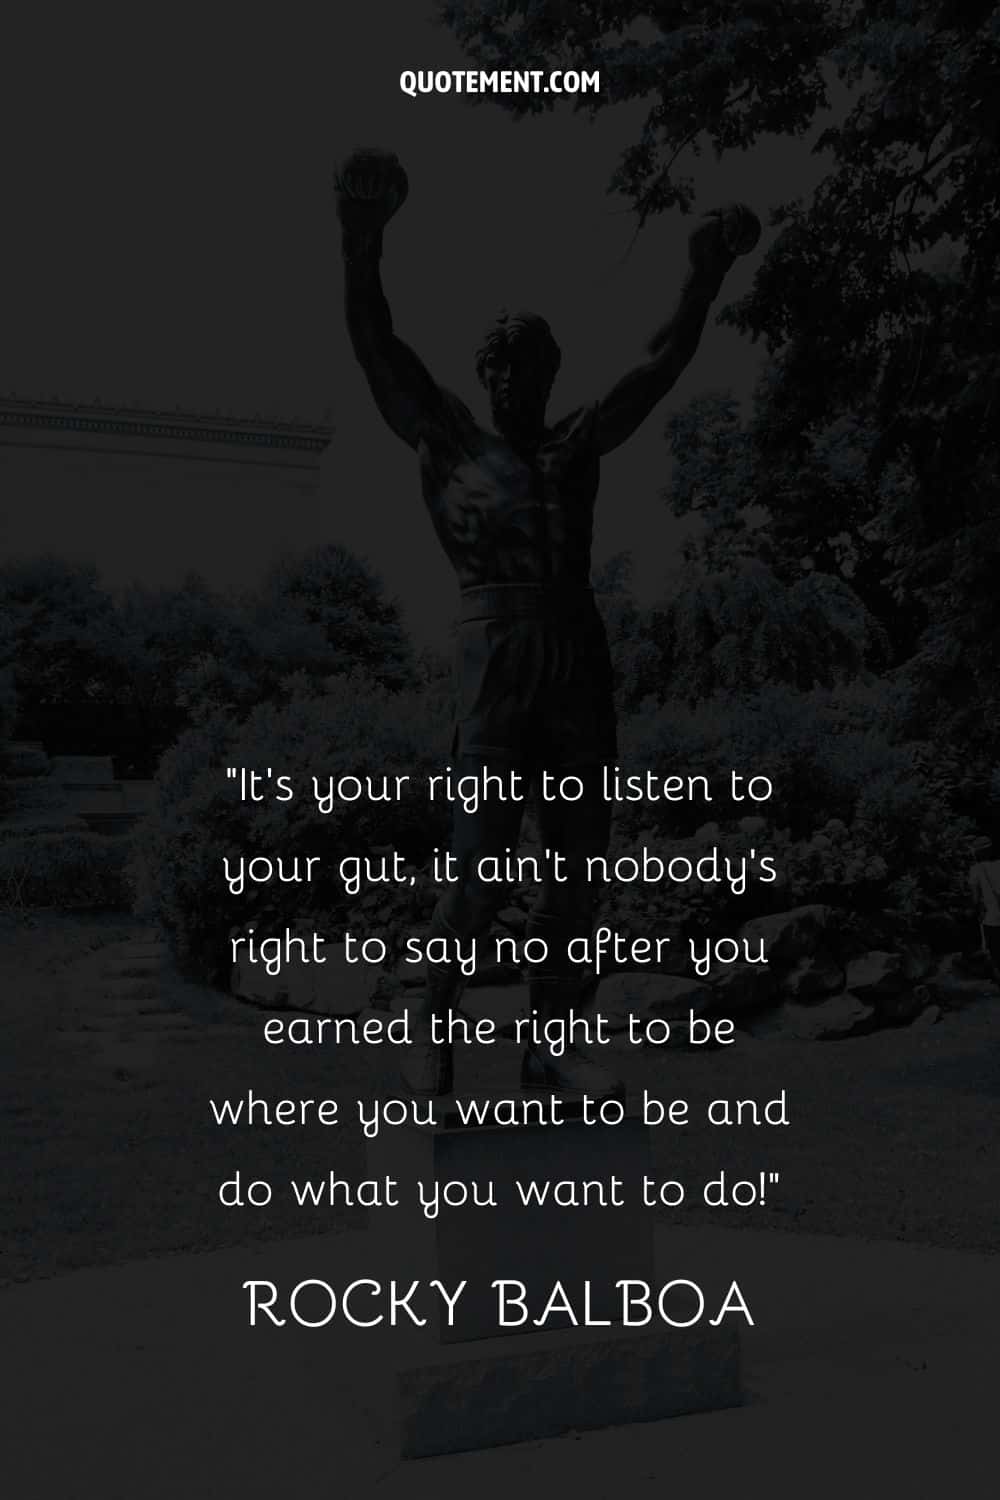 It’s your right to listen to your gut, it ain’t nobody’s right to say no after you earned the right to be where you want to be and do what you want to do